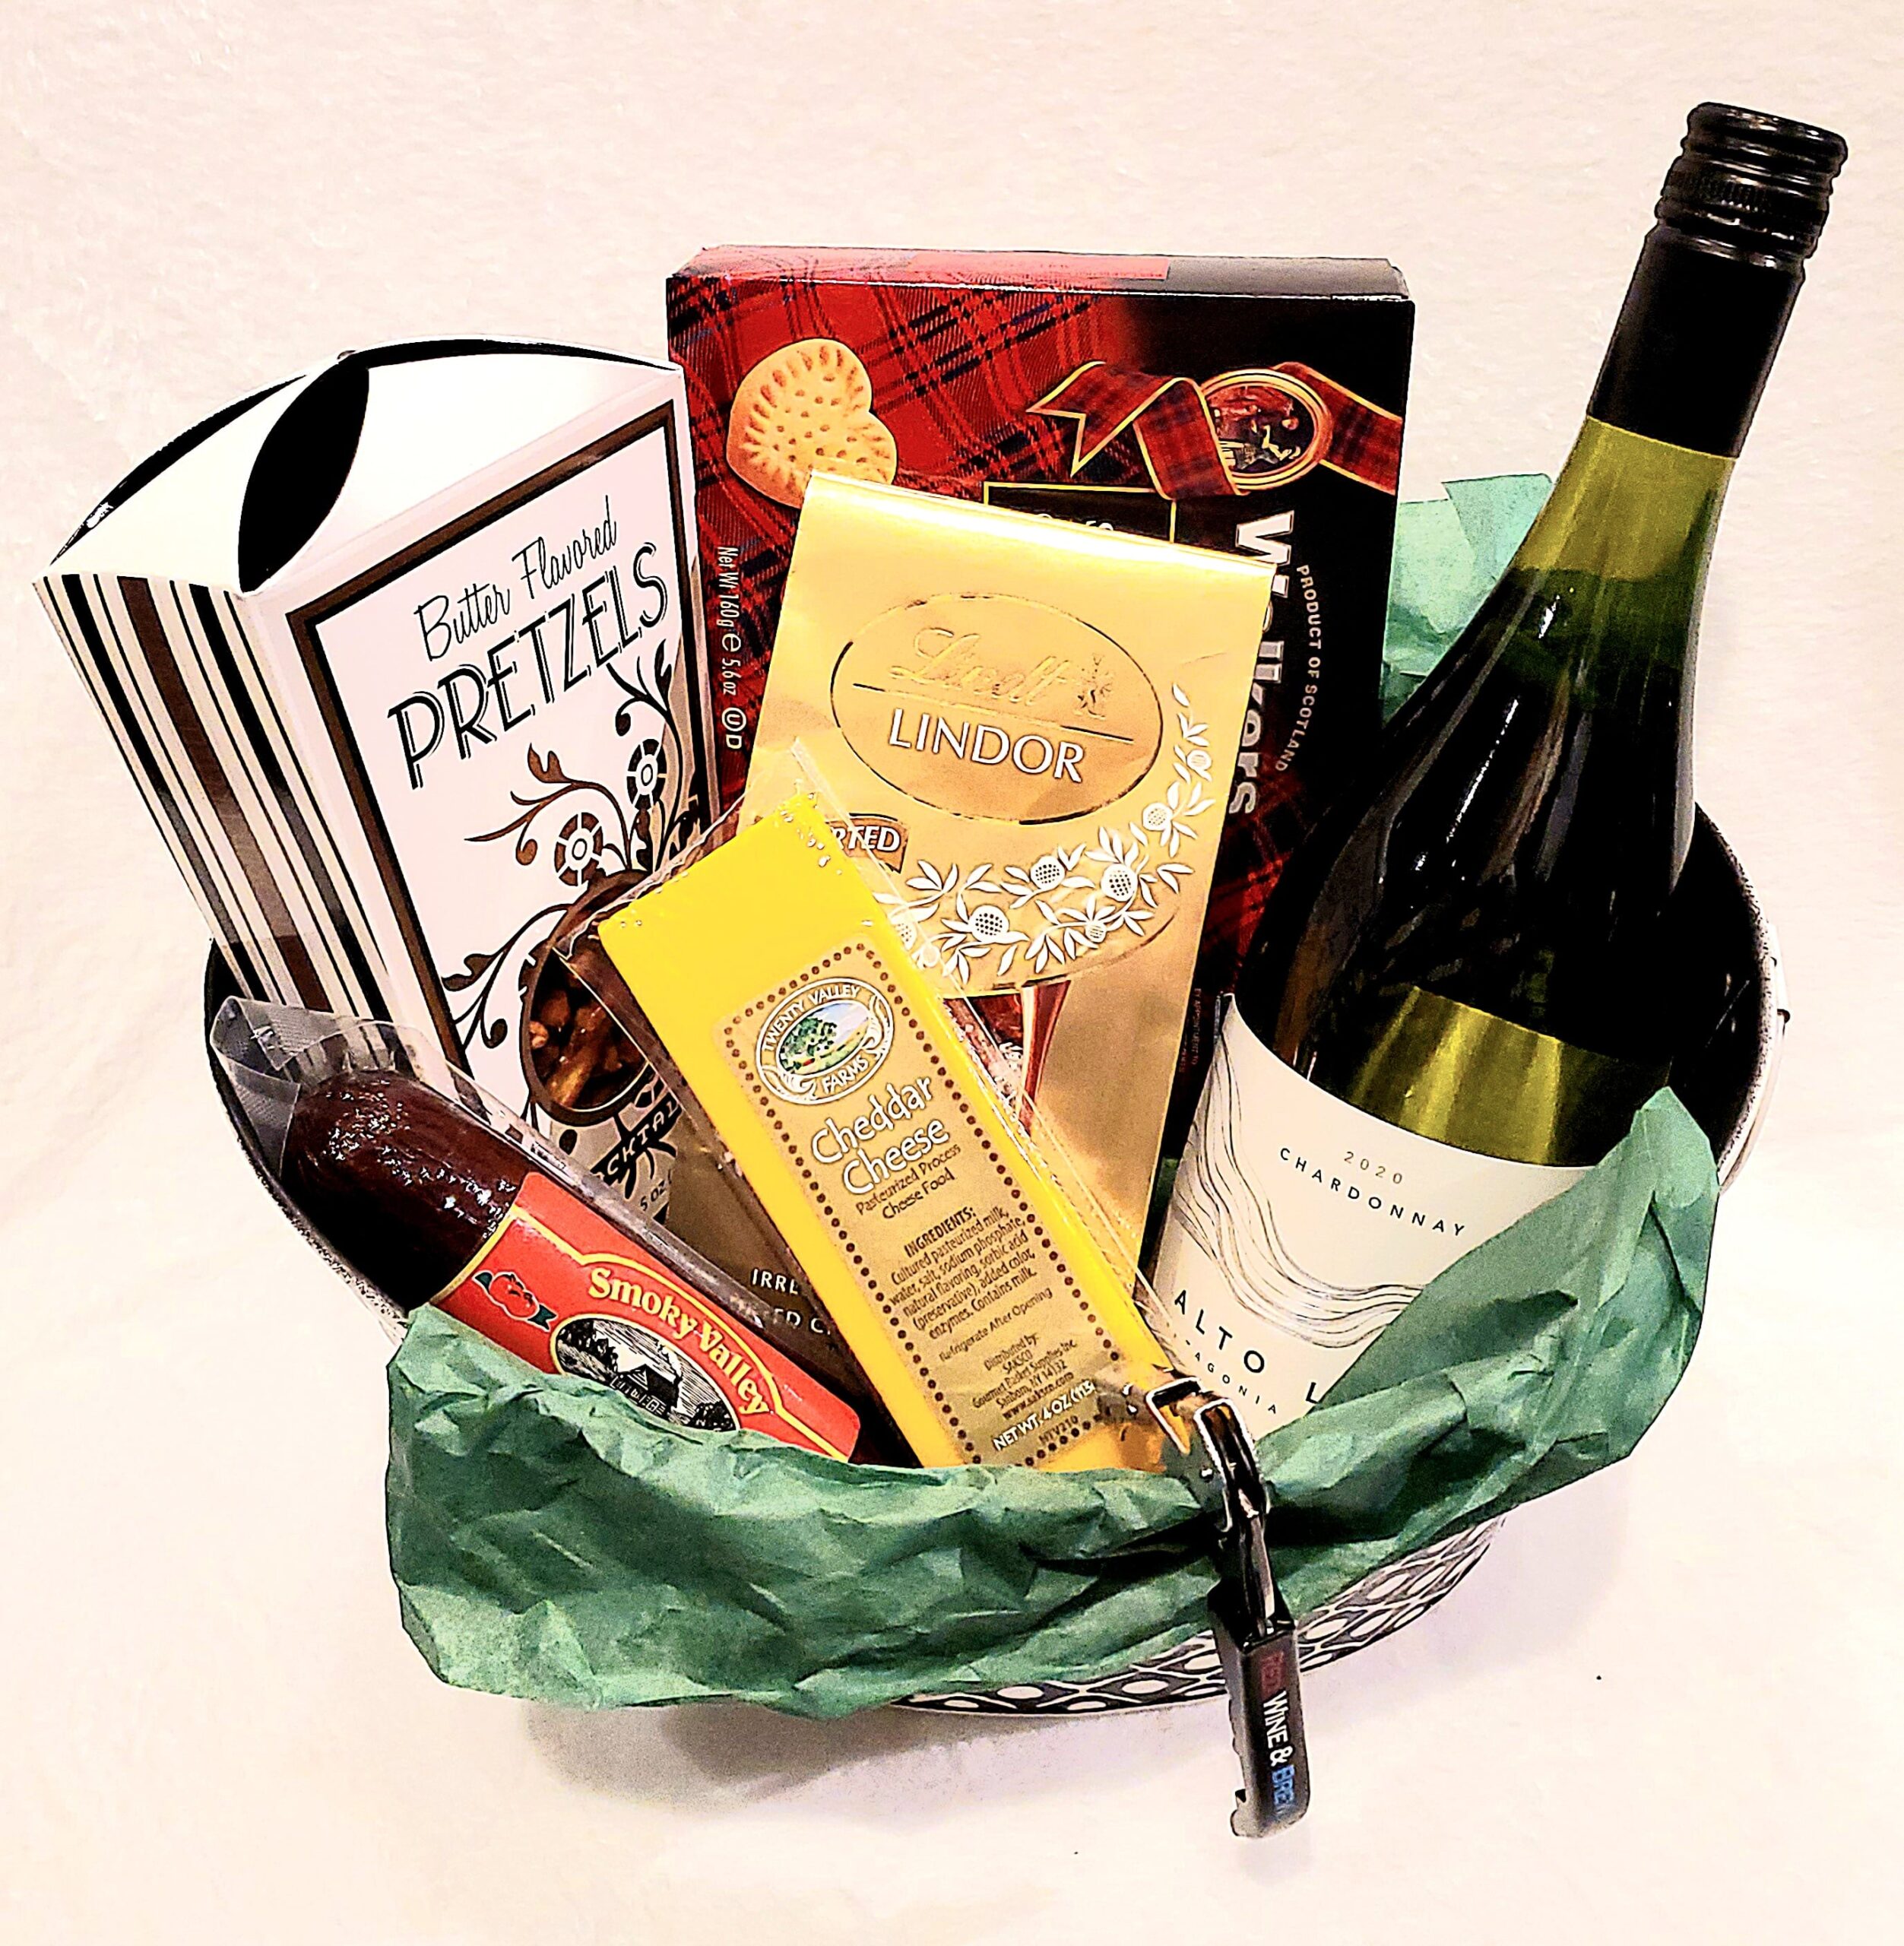 A basket with one wine bottle and assorted snacks.